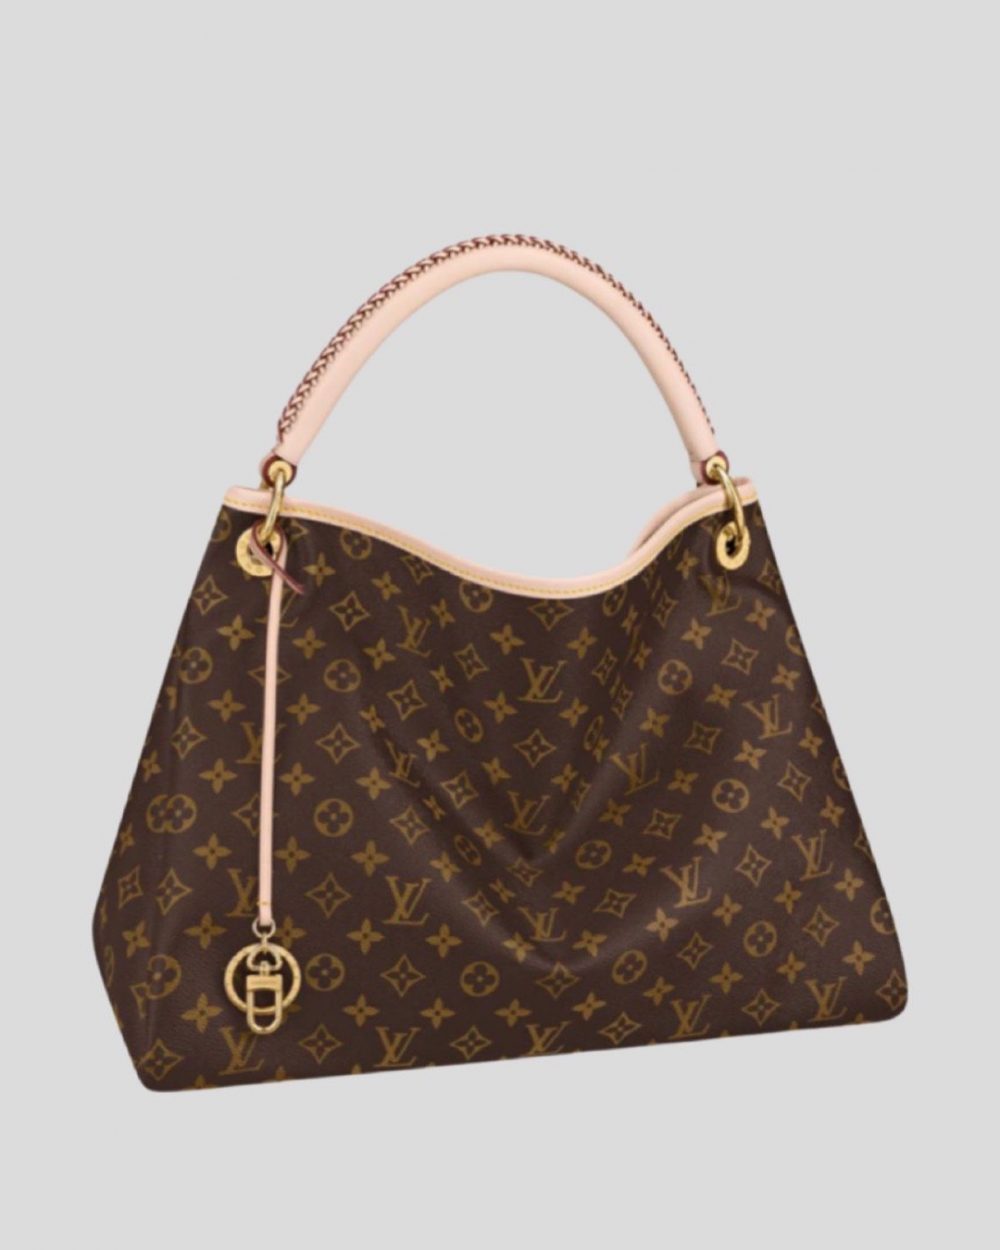 This company makes it easy to rent highend designer handbags from Gucci  to Louis Vuitton